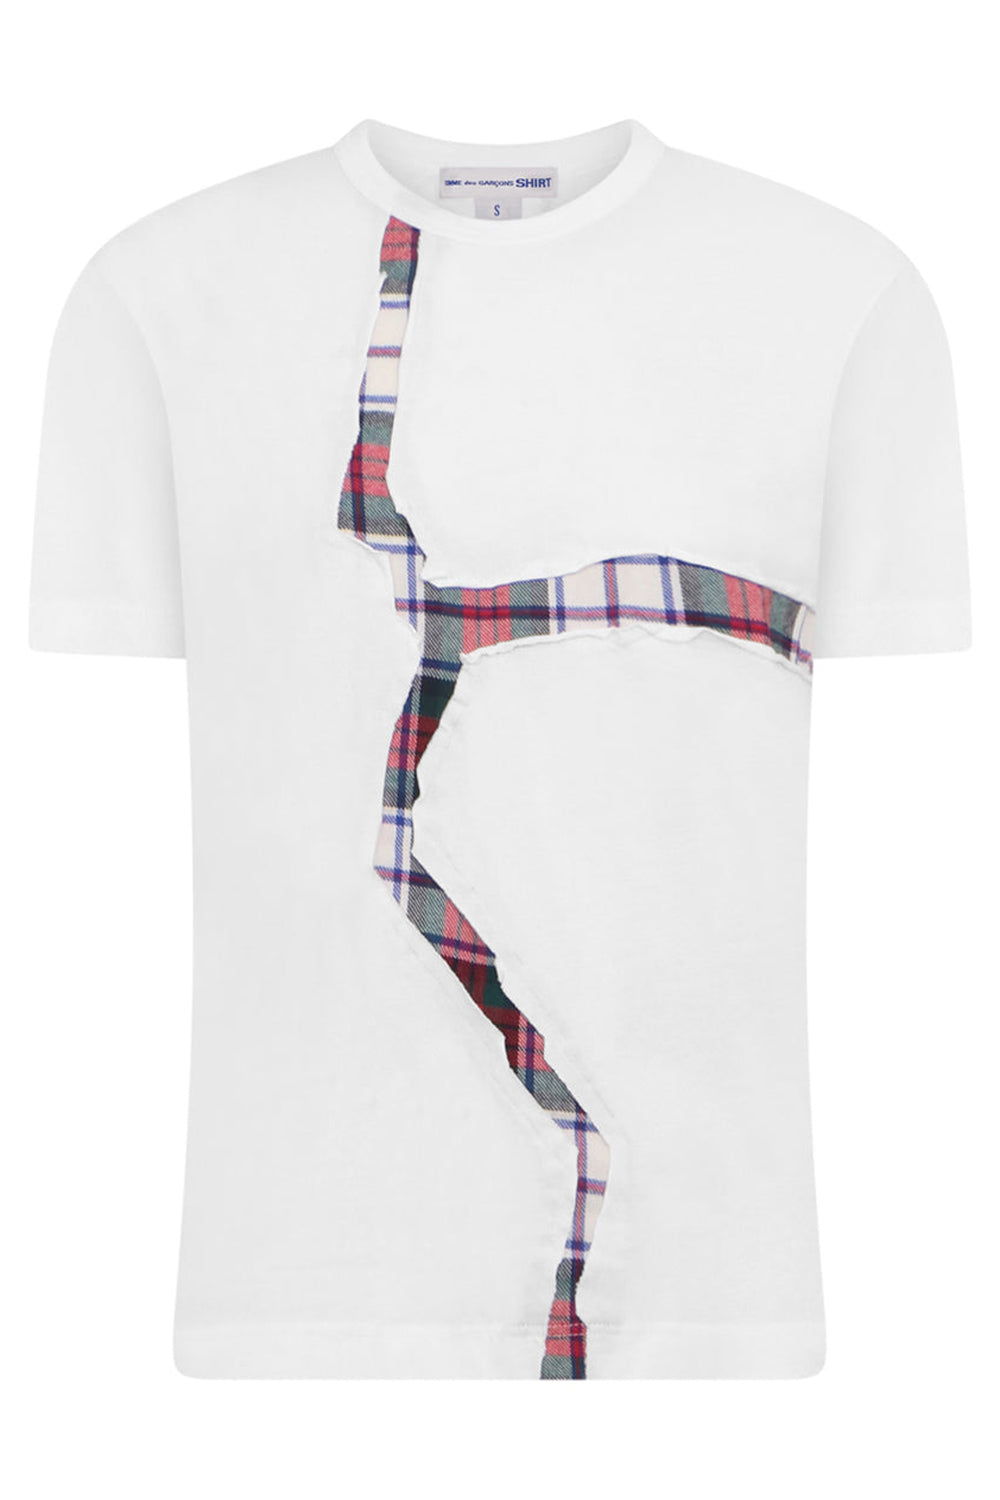 COMME DES GARCONS RTW T-SHIRT WITH UNDERLAY RED CROSS | WHITE